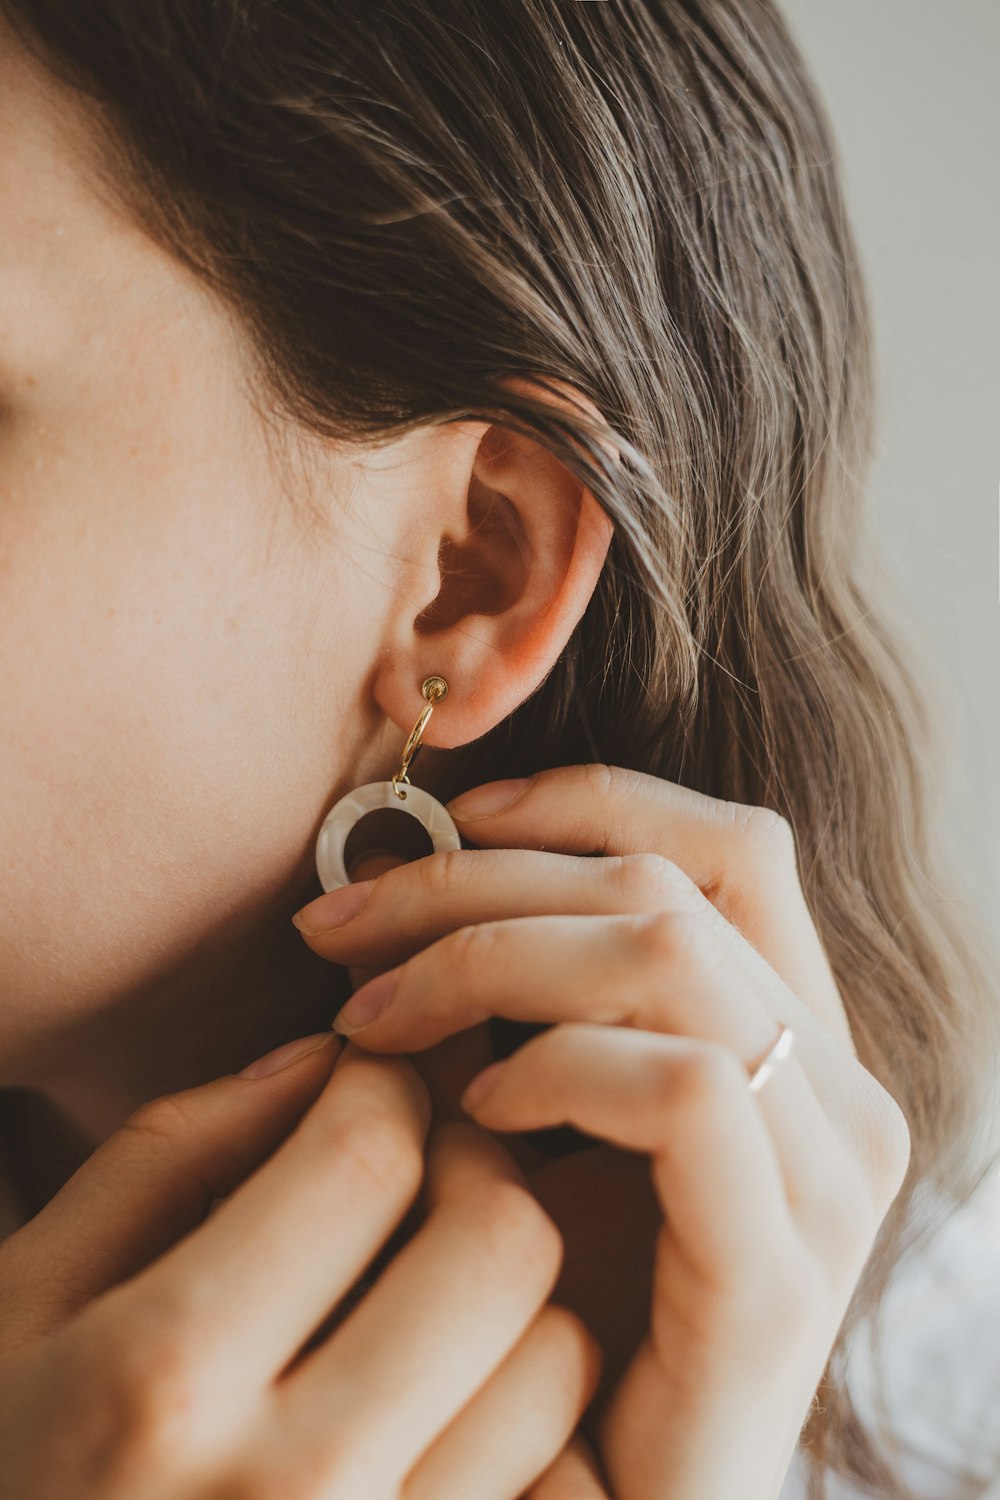 Woman holding earing in fingers.